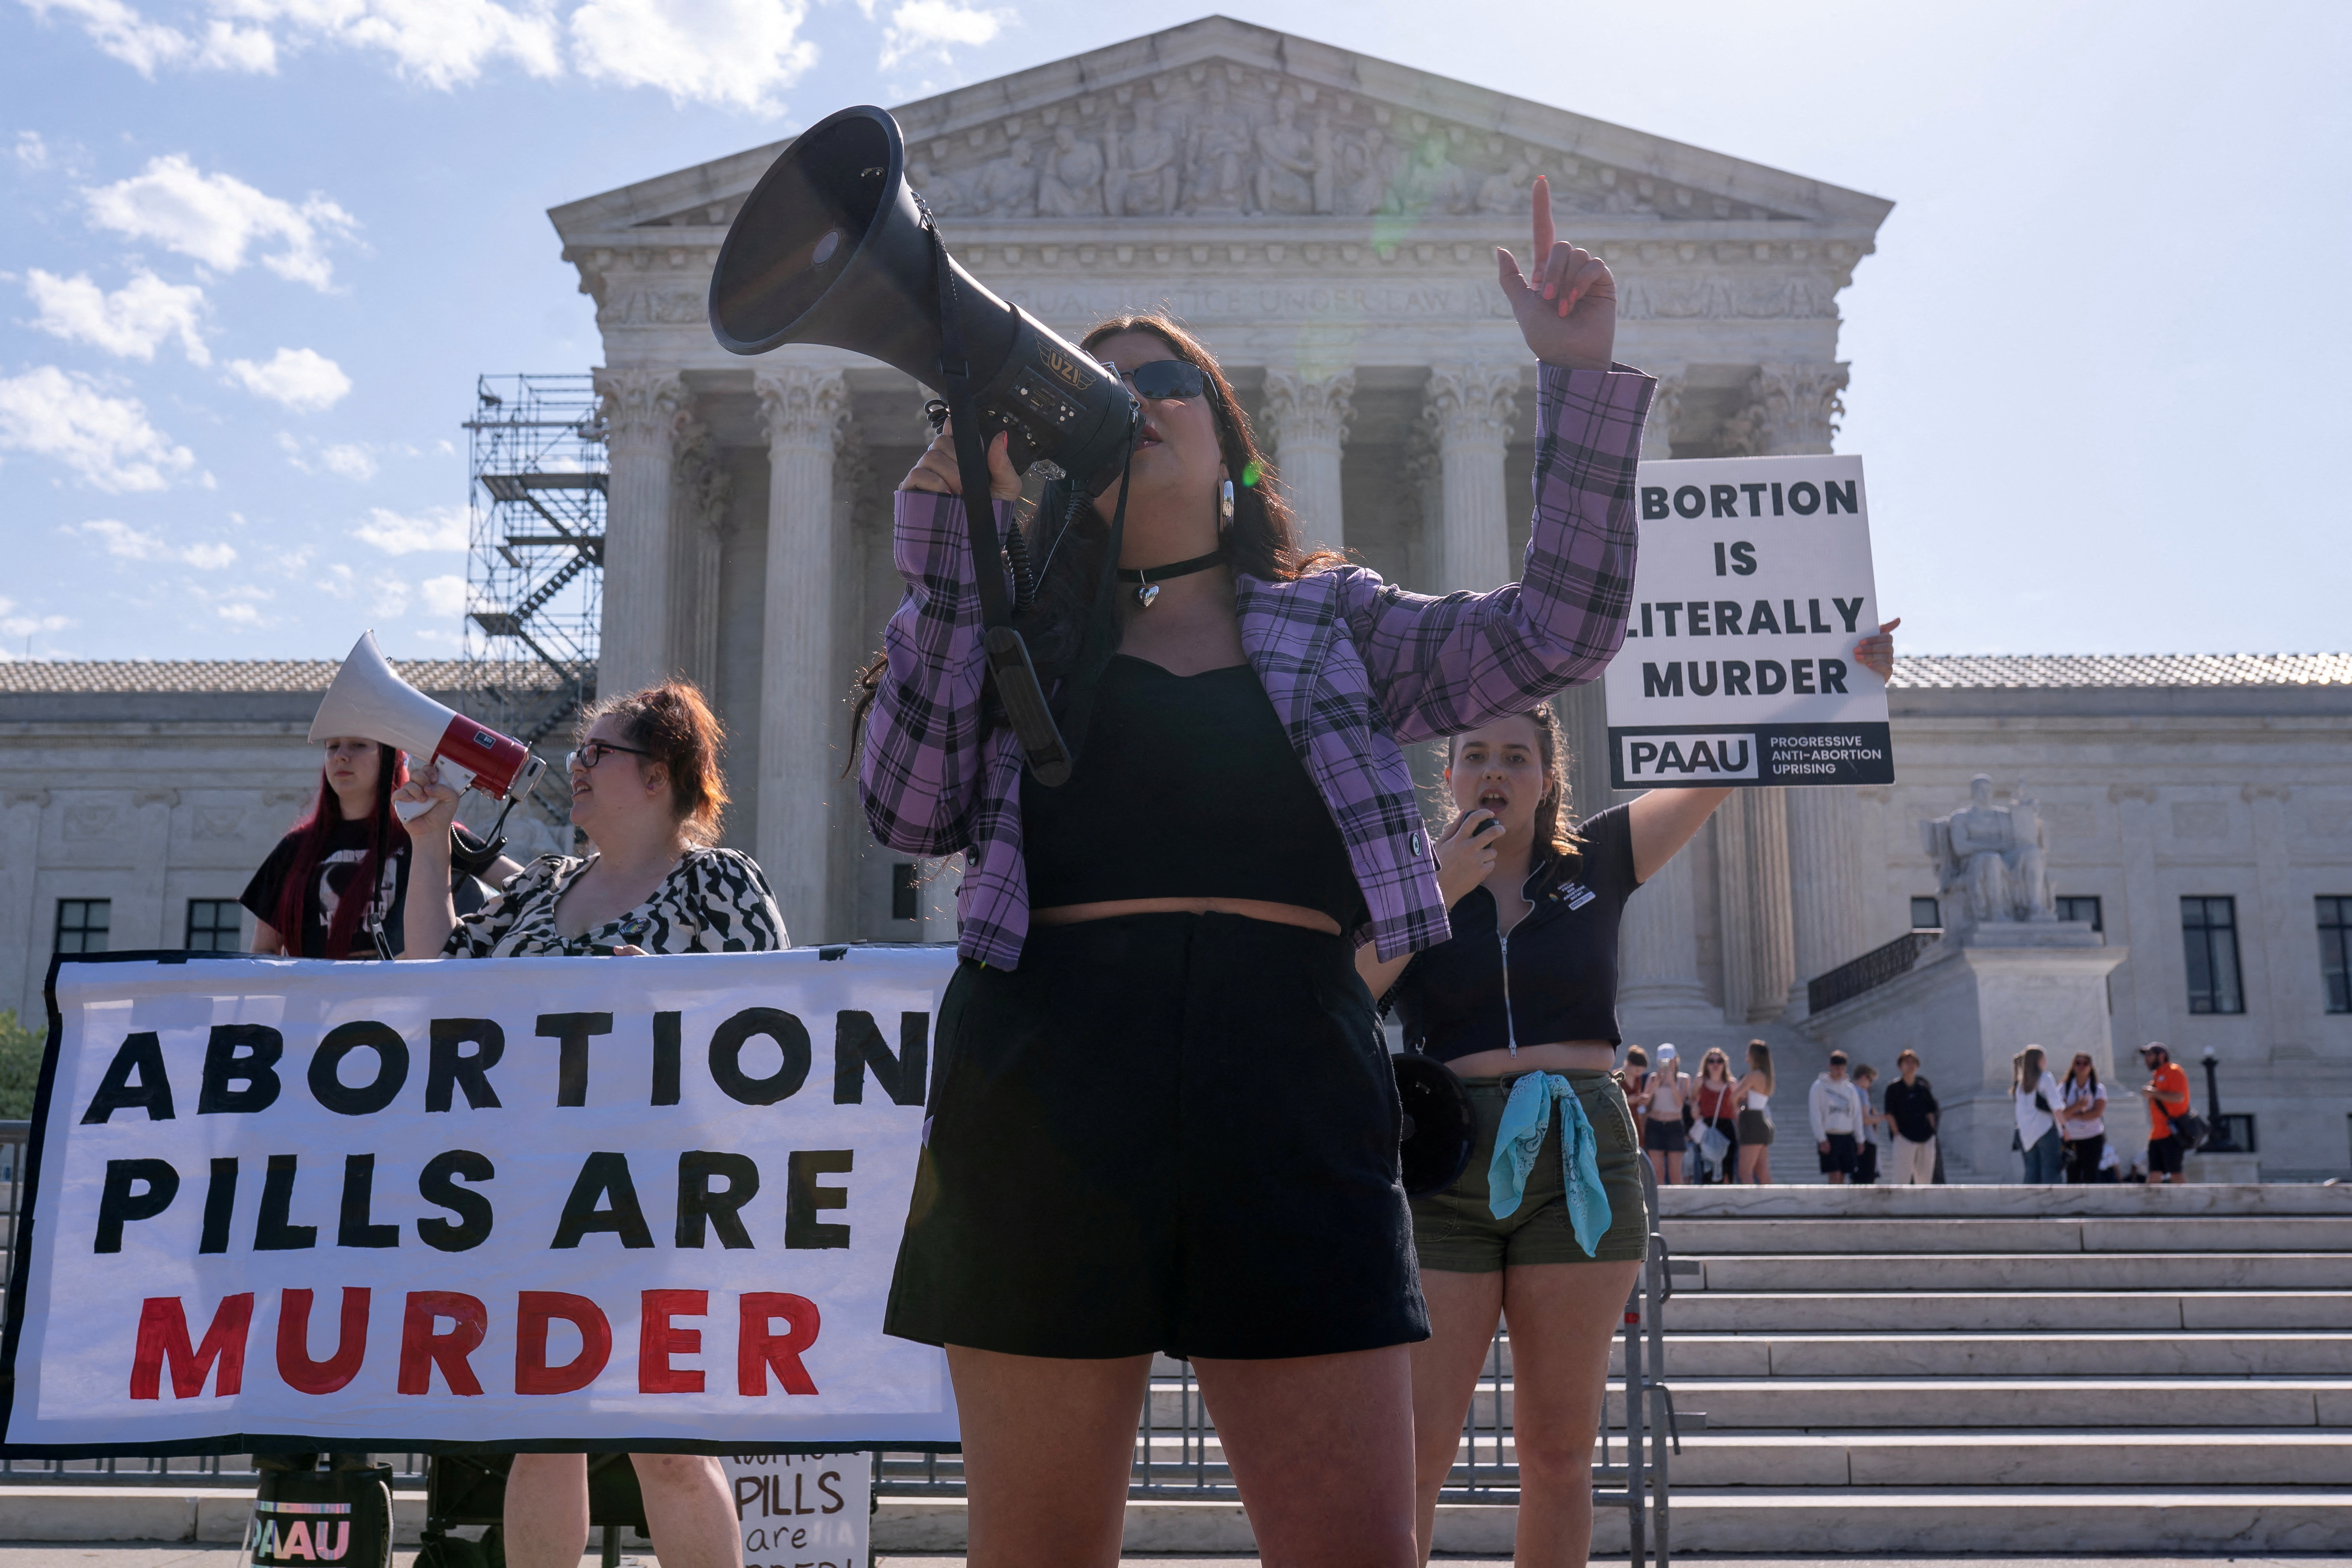 US Supreme Court faces another self-imposed deadline to act on abortion pill curbs